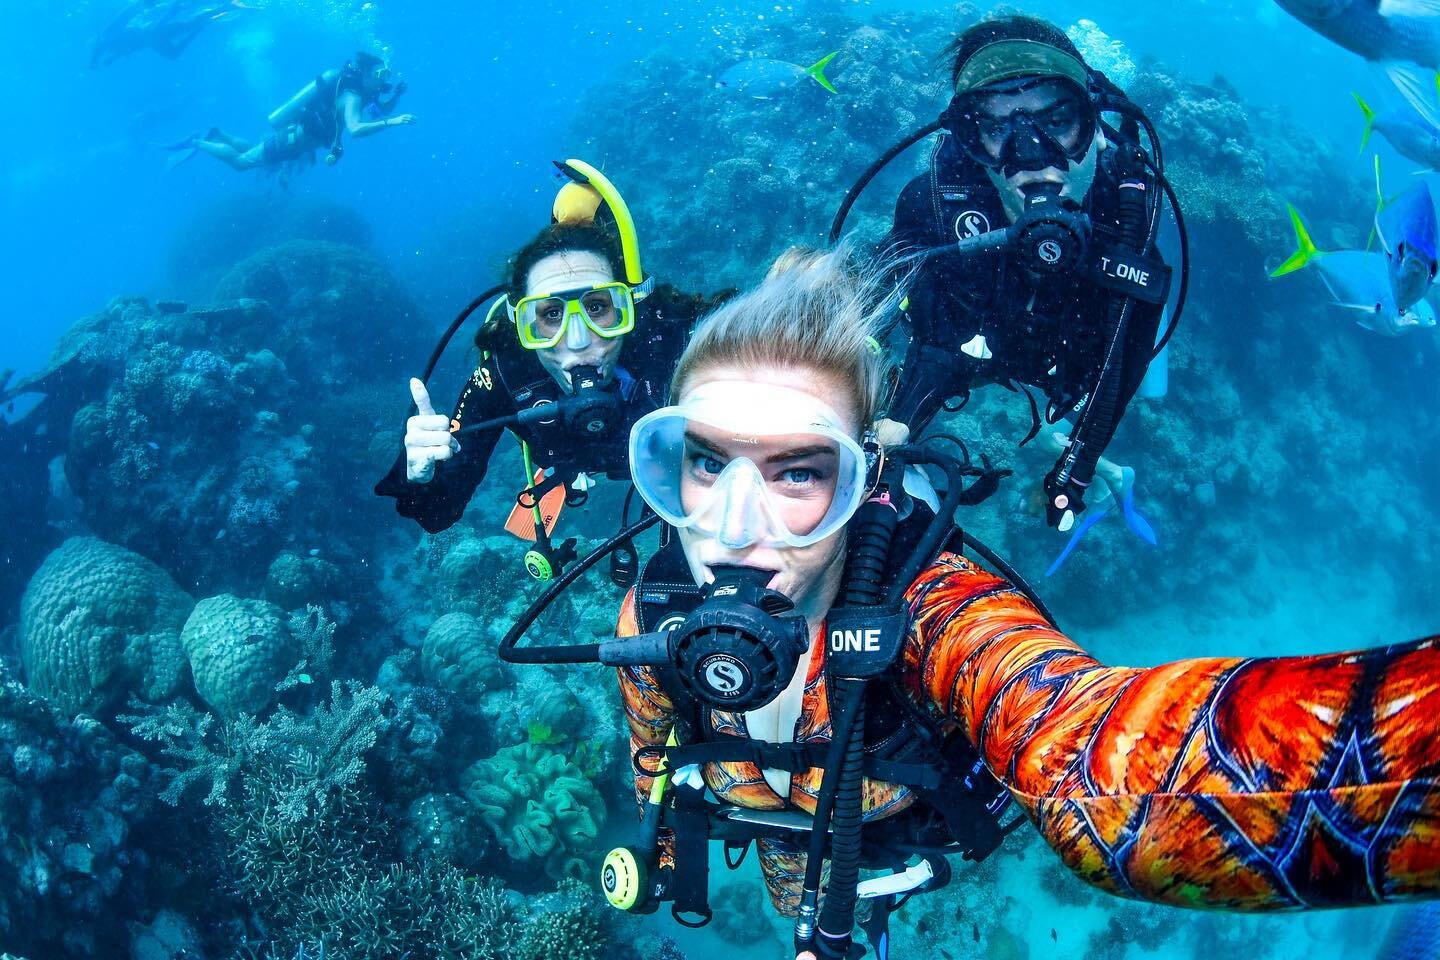 🧜&zwj;♀️🧜&zwj;♀️🧜&zwj;♀️ 🤿🤿🤿
Just three real-life mermaid adventure women!
The most amazing dive photographer ever @dive_down_under and the most wonderful guide @indiahhodgson!

Vessel: @downundercruiseanddive 
The most amazing dive crew and bo